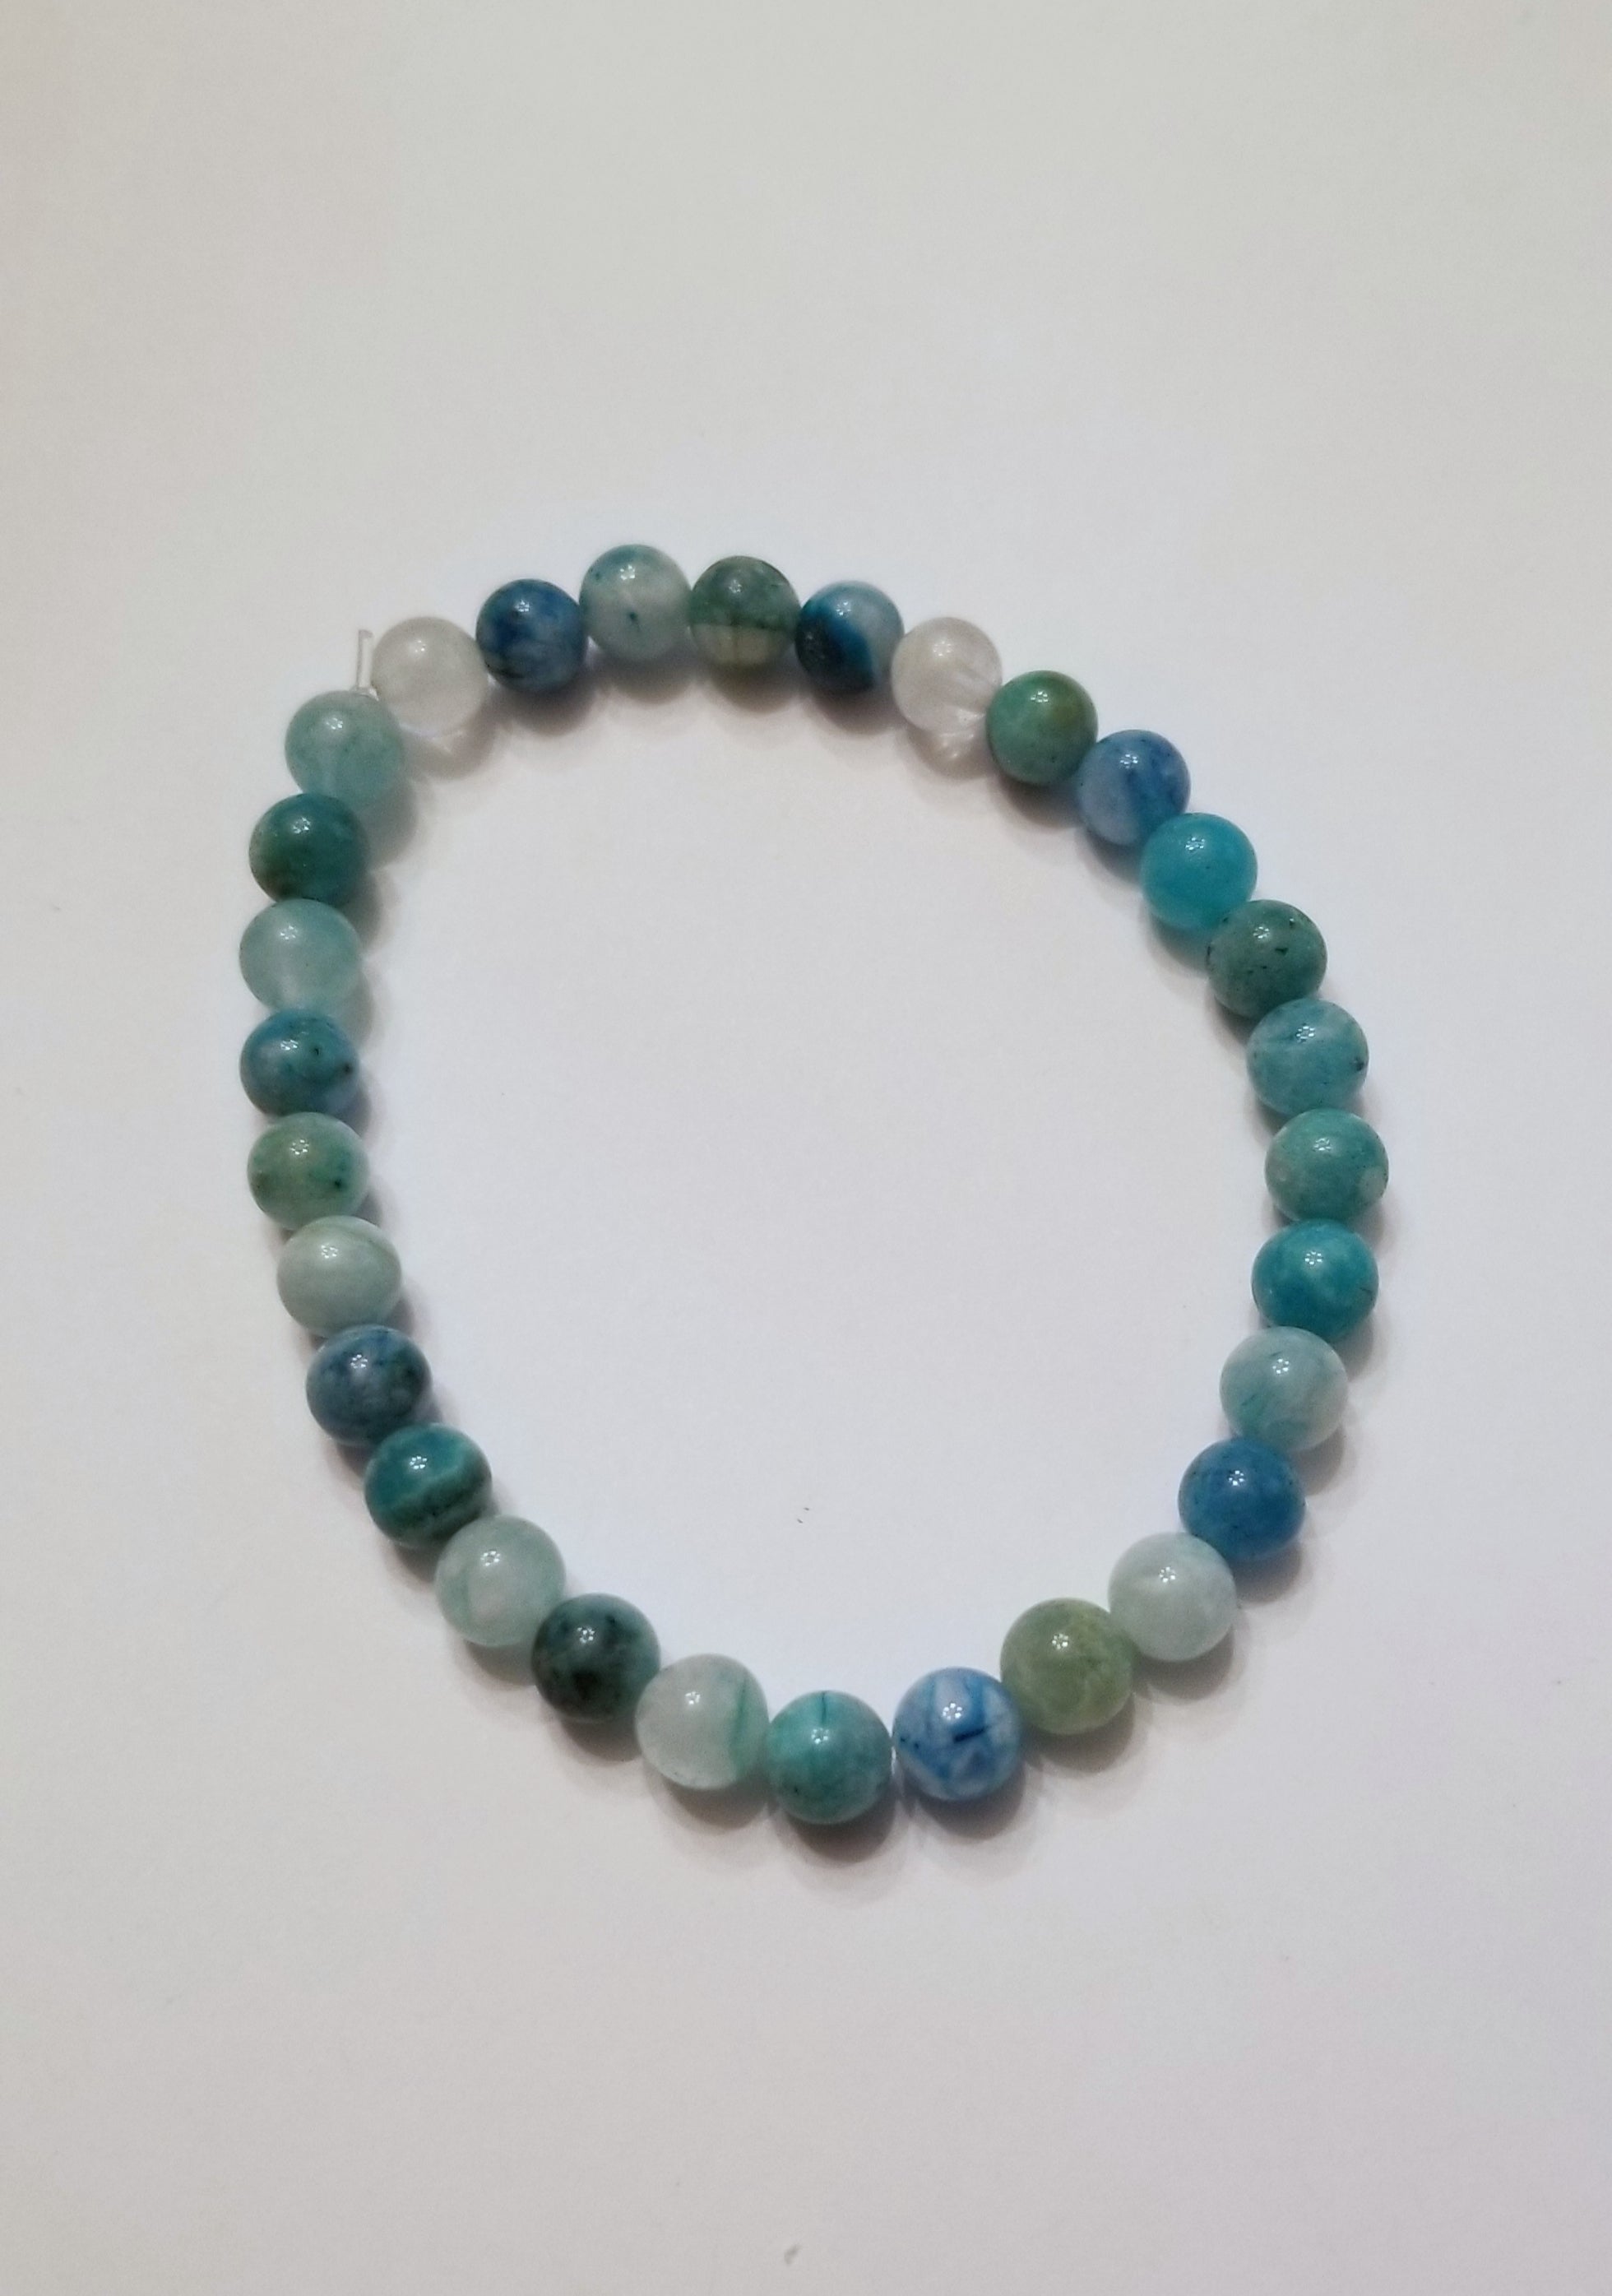 Colors of the Beach - Natural Stone Stretch Bracelets